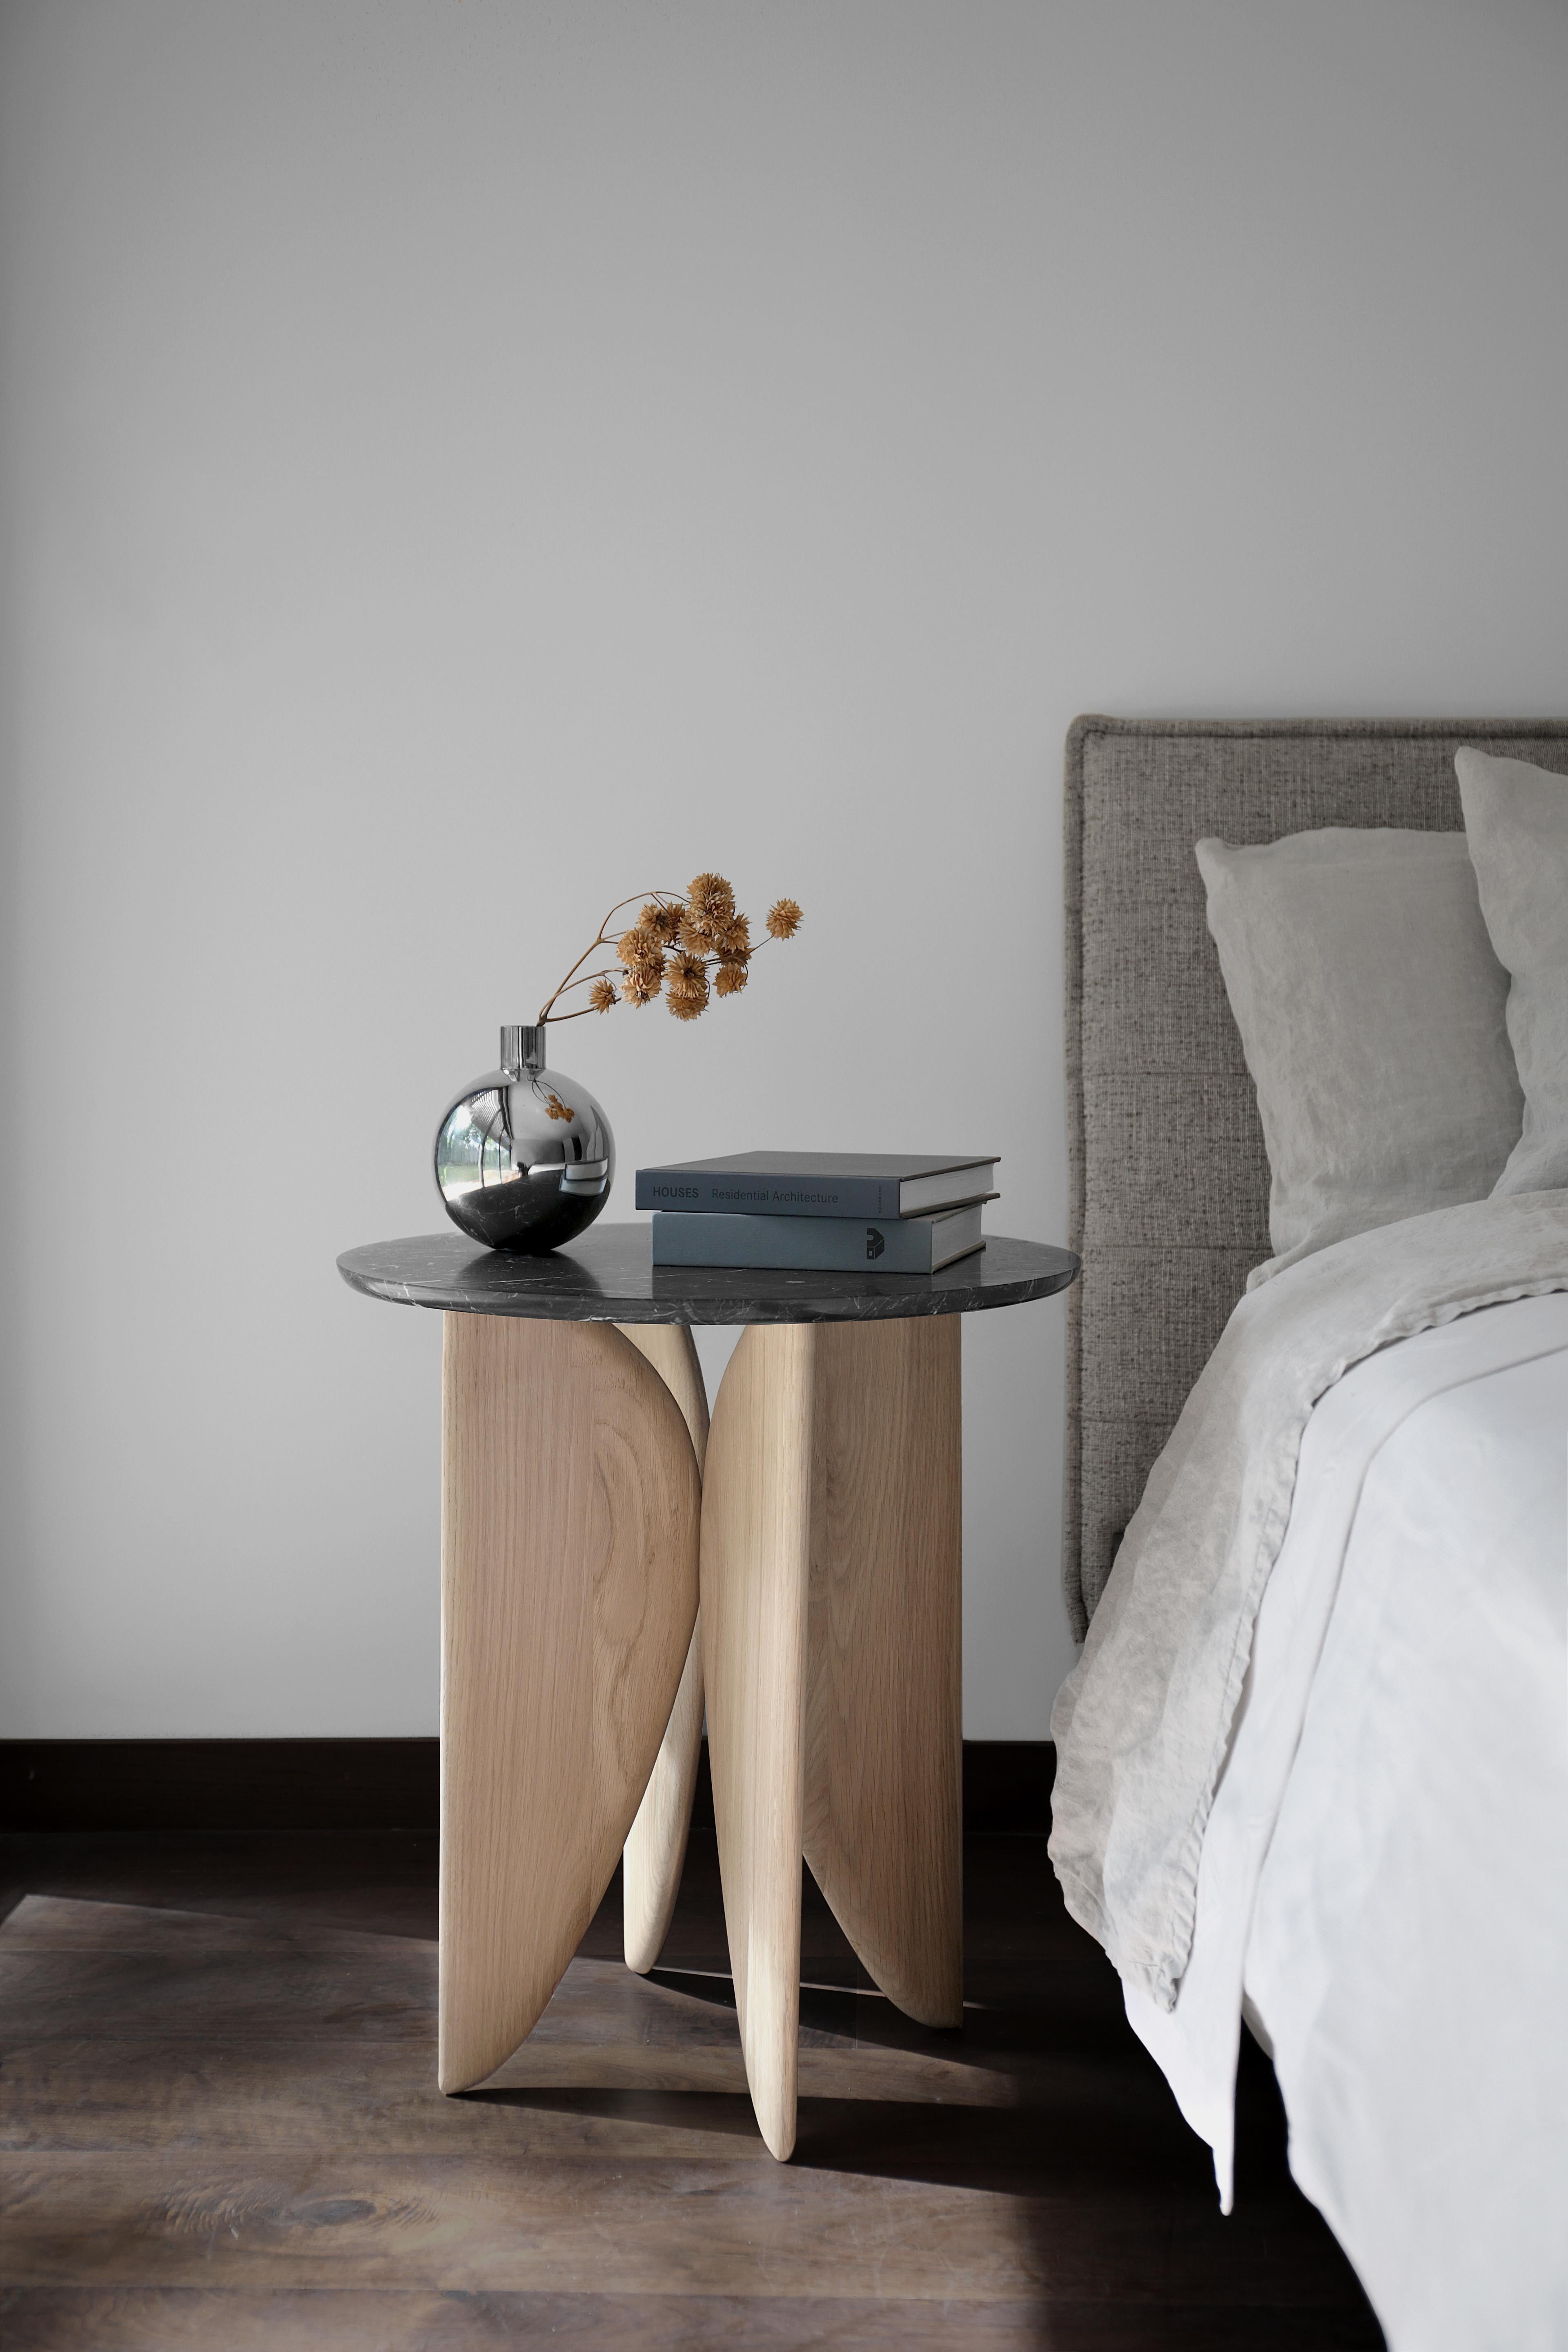 Set of 2 Noviembre VI Side Tables, Night Stand in Oak Wood and Marble Top

The Noviembre collection is inspired by the creative values of Constantin Brancusi, a Romanian sculptor considered one of the most influential artists of the twentieth